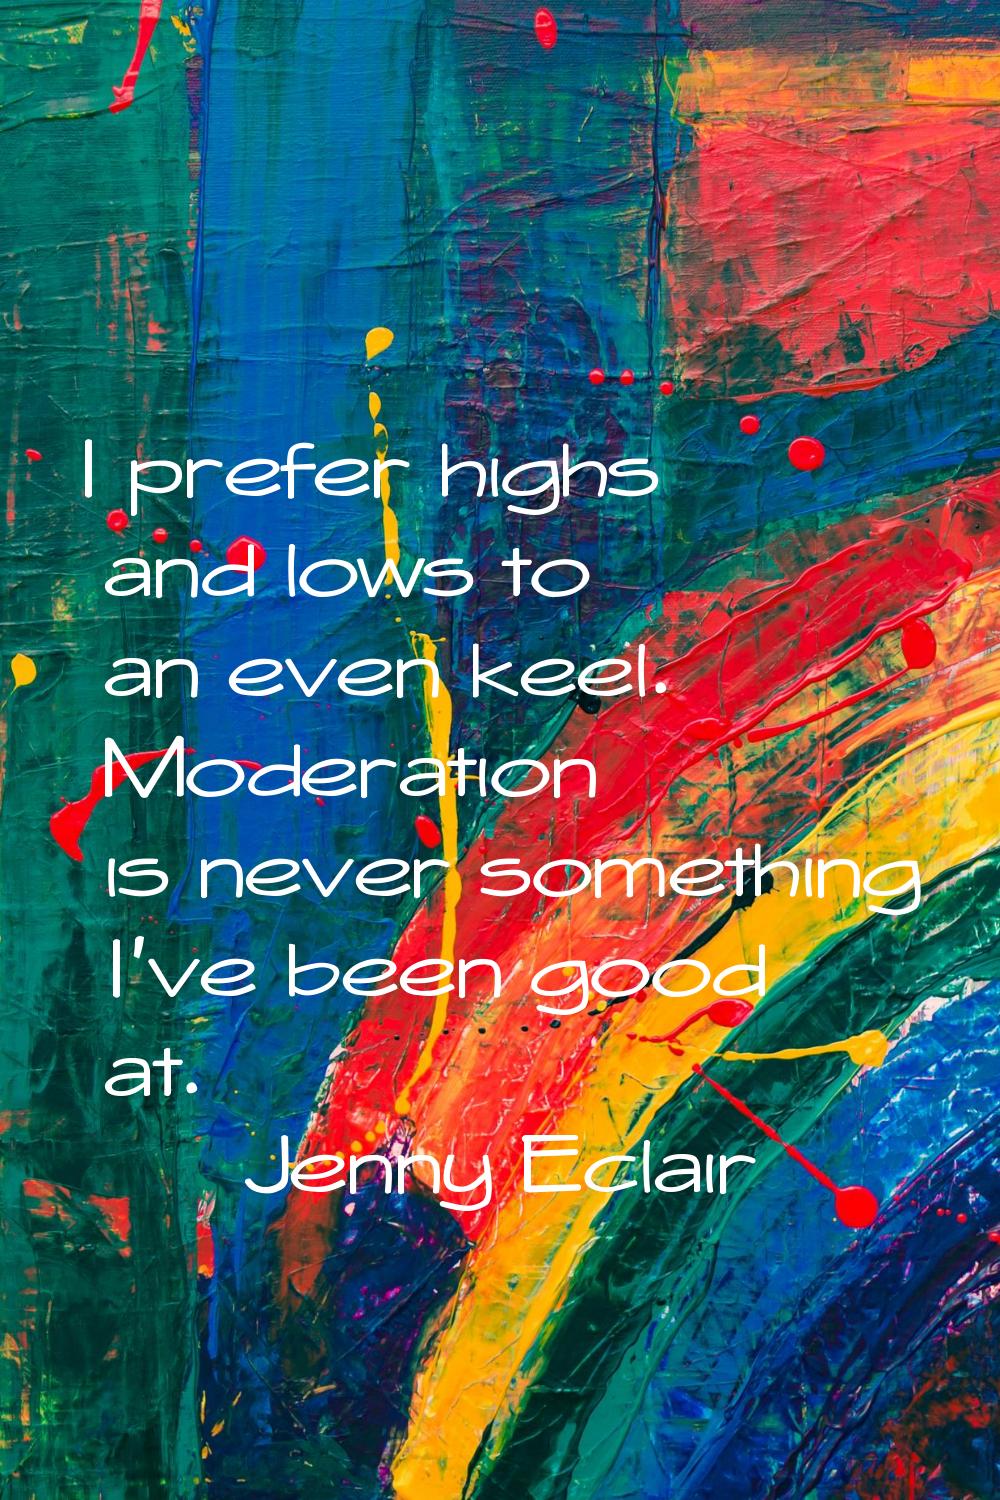 I prefer highs and lows to an even keel. Moderation is never something I've been good at.